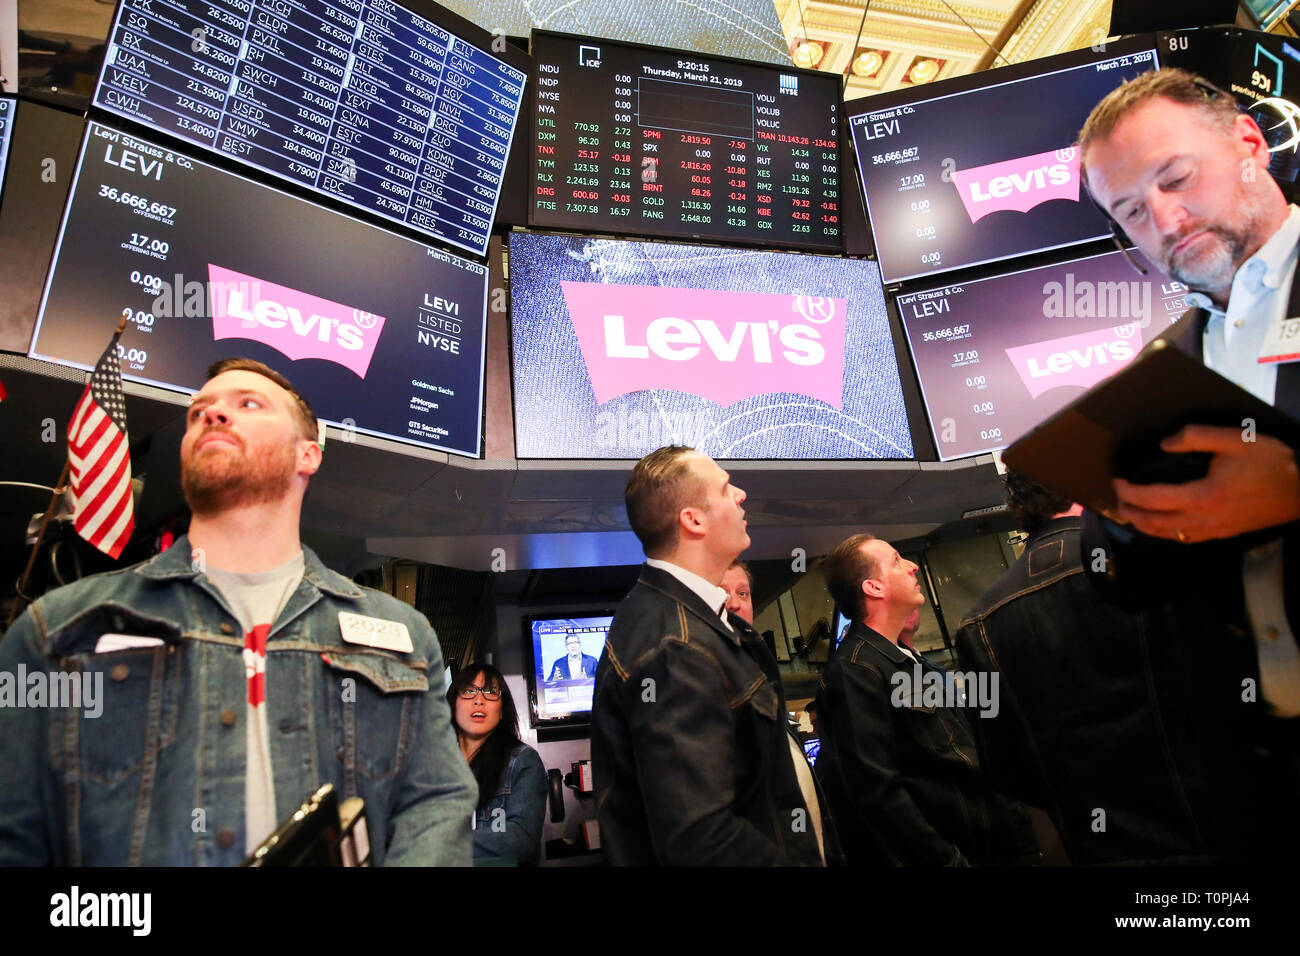 New York, USA. 21st Mar, 2019. Traders wearing denim clothing and jeans work at the New York Stock Exchange (NYSE) during the initial public offering (IPO) of Levi Strauss & Co., in New York, the United States, March 21, 2019. Blue jeans giant Levi Strauss & Co. began trading on the NYSE on Thurday. The 166-year-old company first went public in 1971, but has been private for the last 34 years. Credit: Wang Ying/Xinhua/Alamy Live News Stock Photo